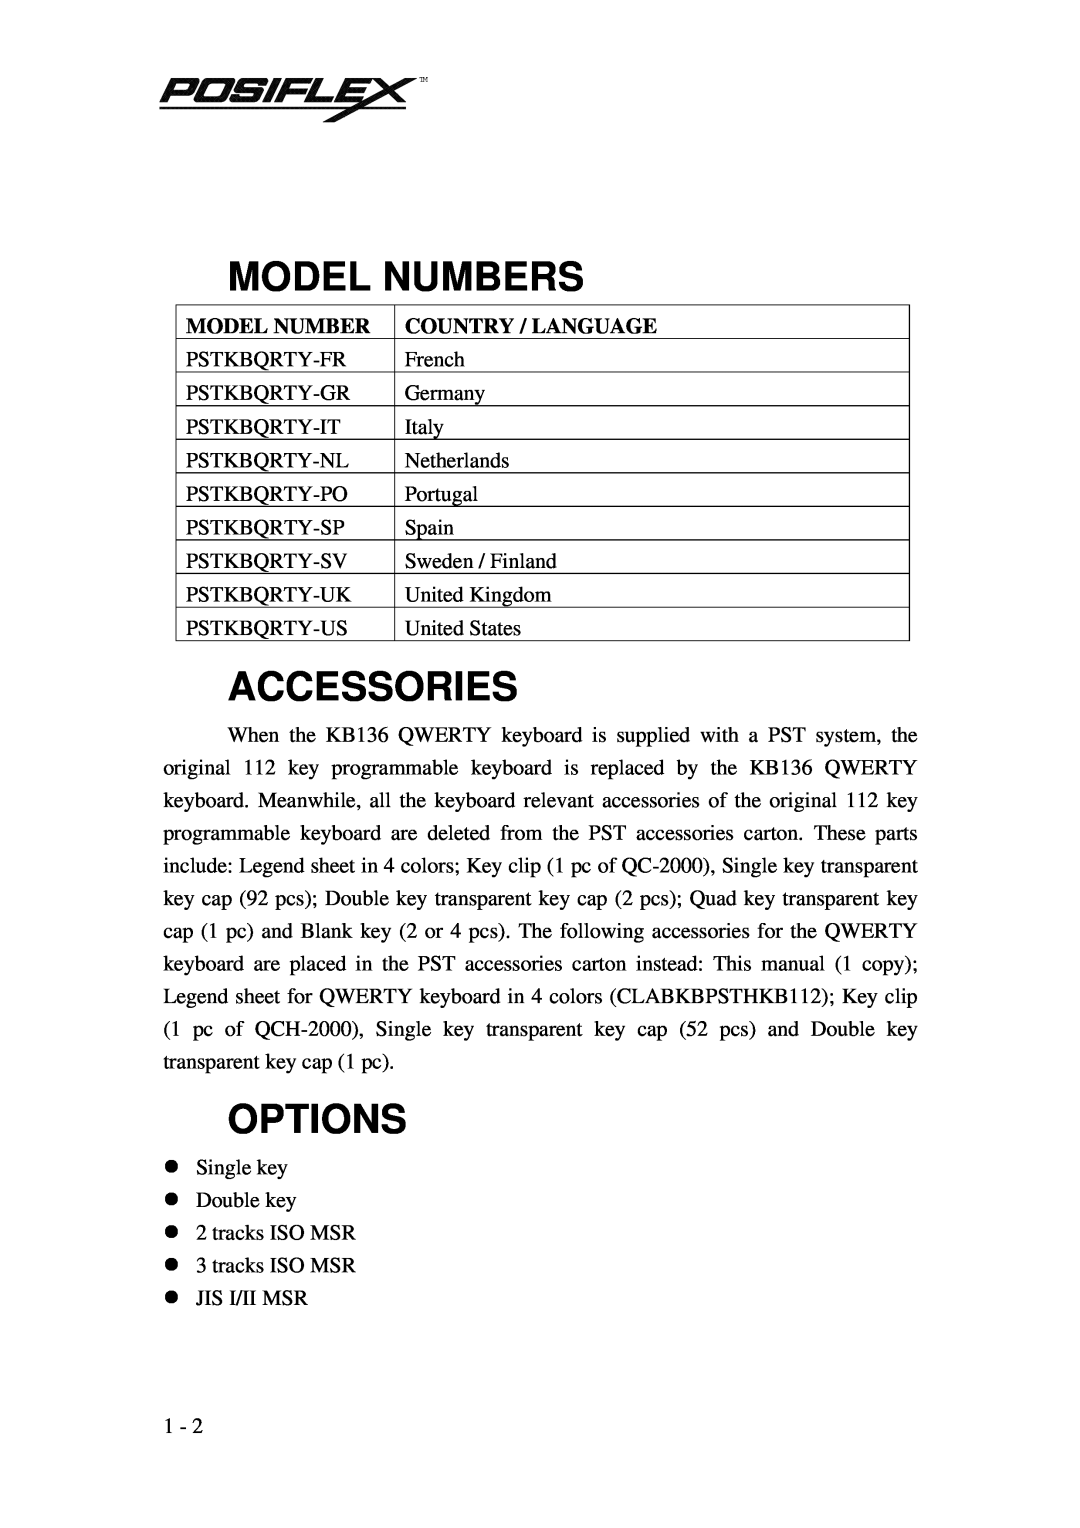 POSIFLEX Business Machines PST KB136 manual Model Numbers, Accessories, Options, Country / Language 